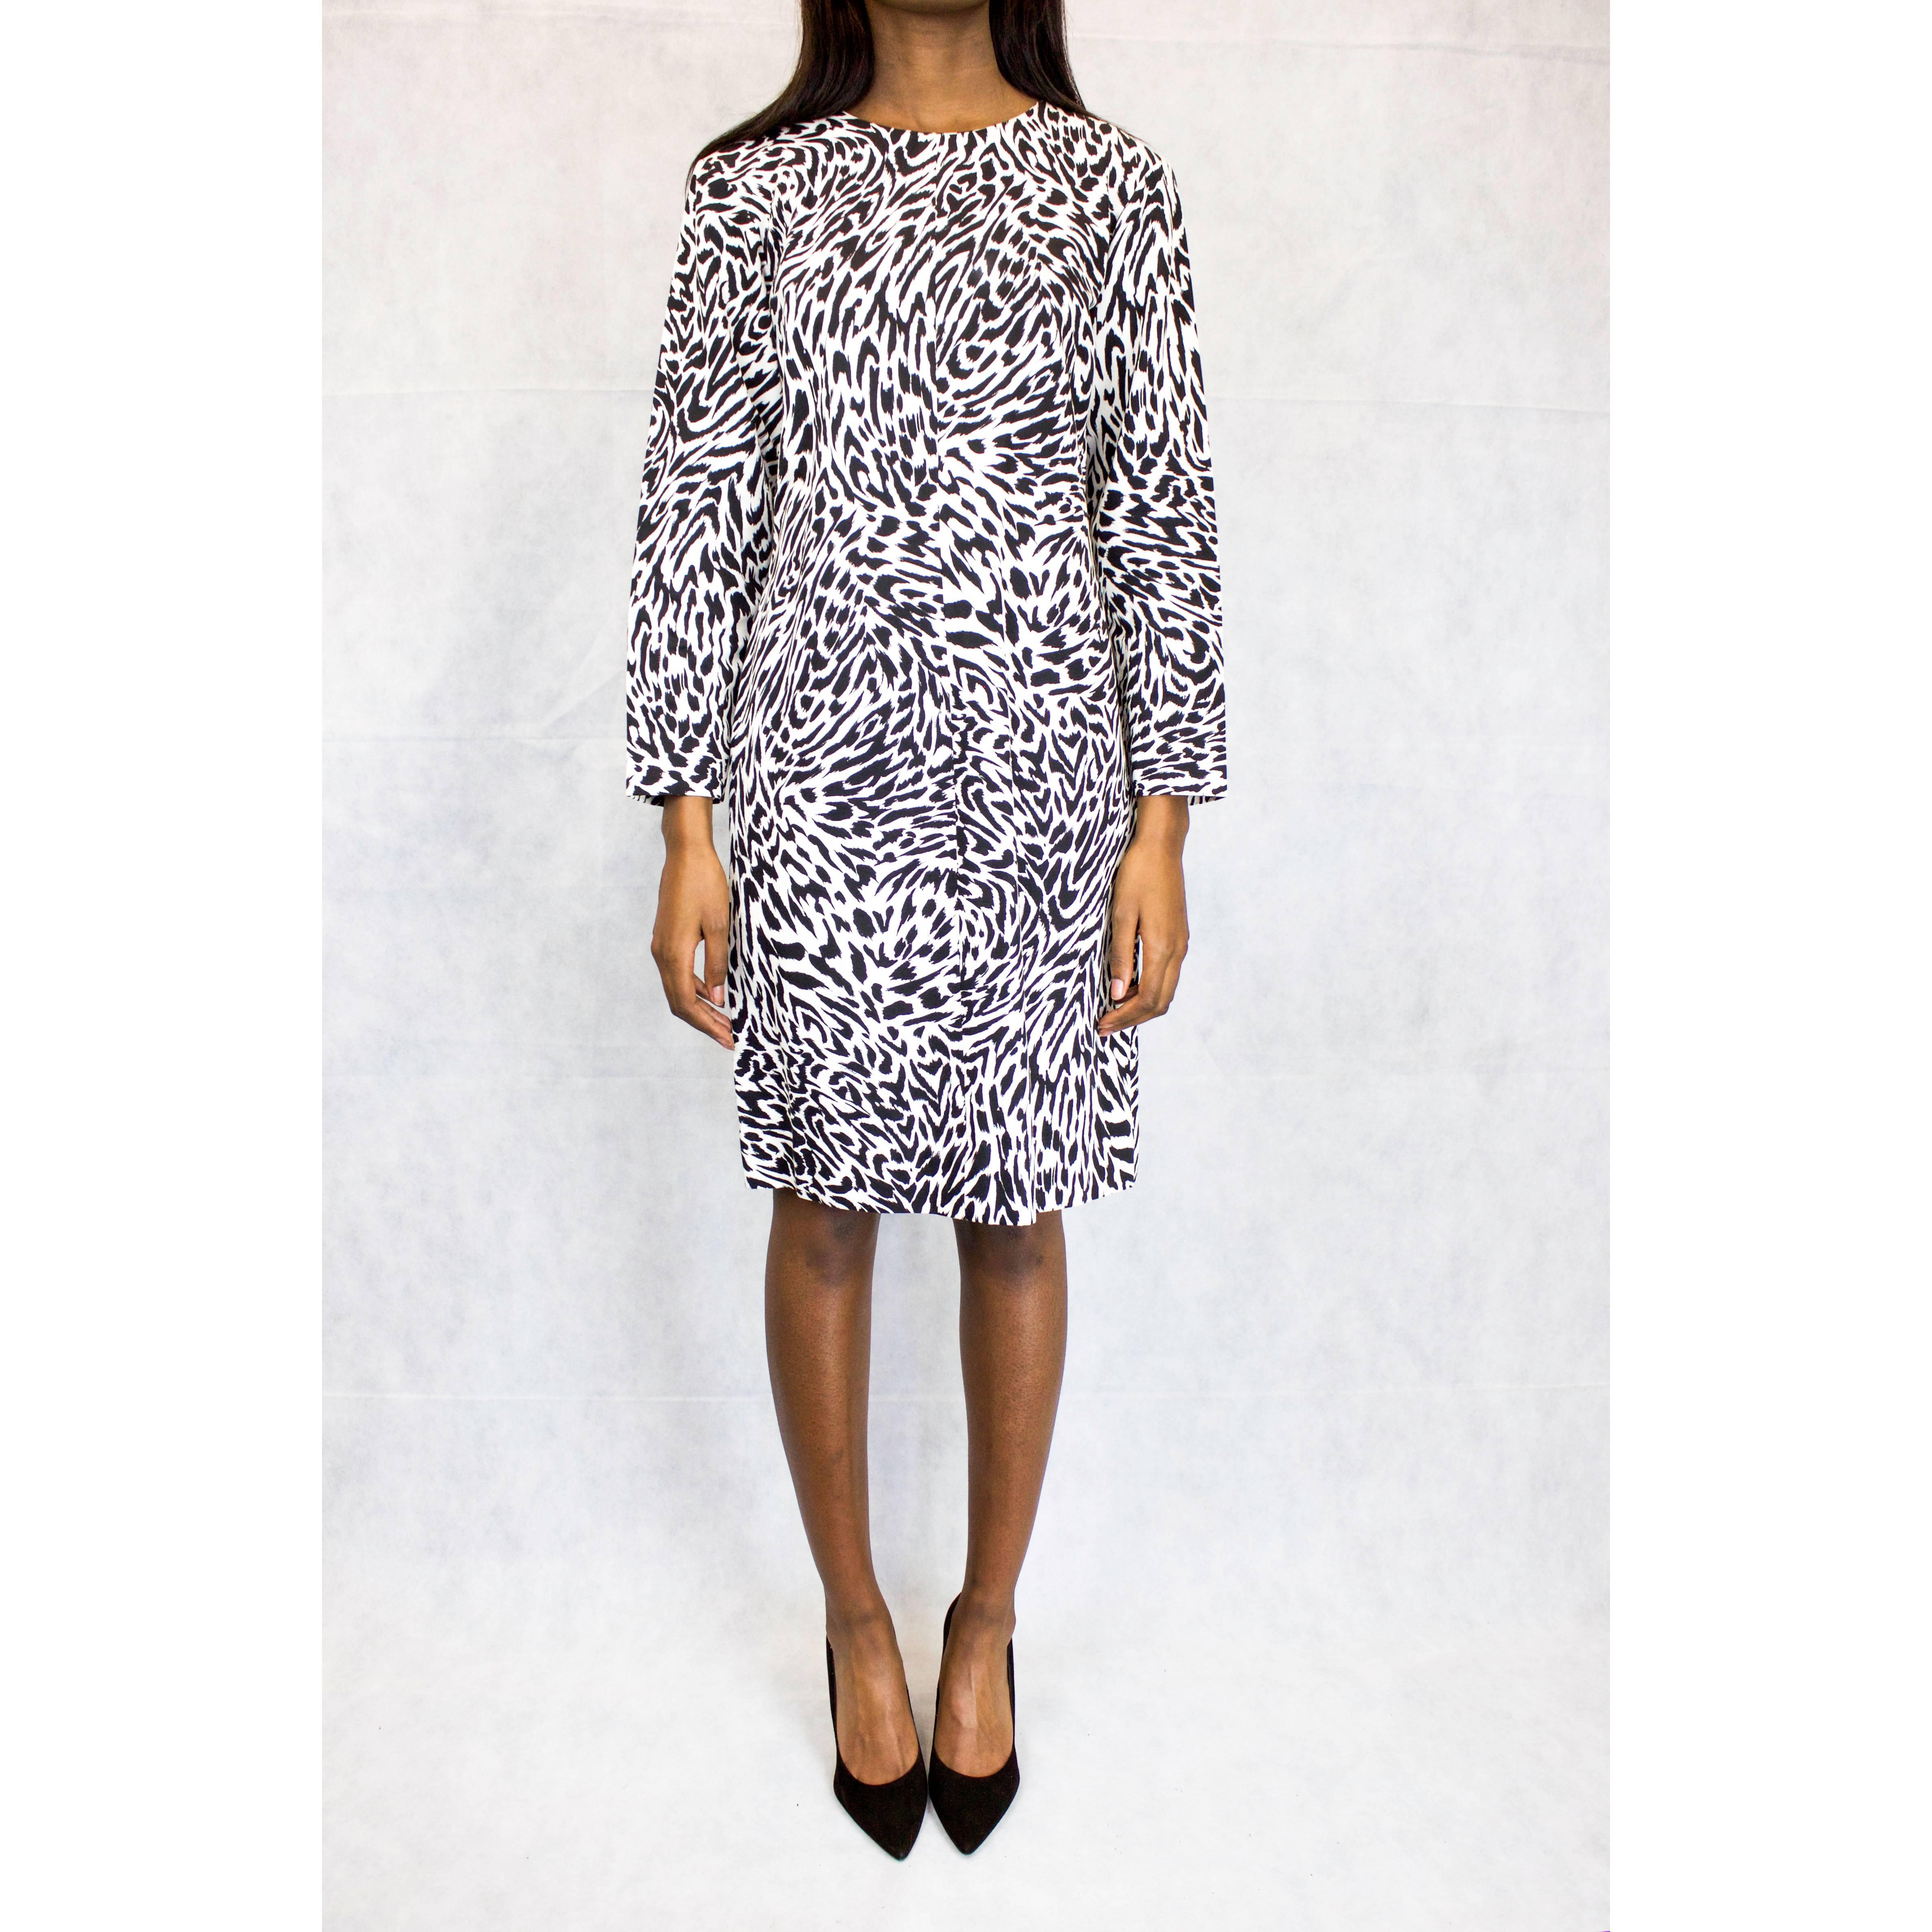 This fun and contemporary slim fitted monochrome animal-esque print dress was designed in  1990 when Saint Laurent was still heading the label. It is constructed from grosgrain (a fine ribbed cotton material). Featuring a zip at the back, a round